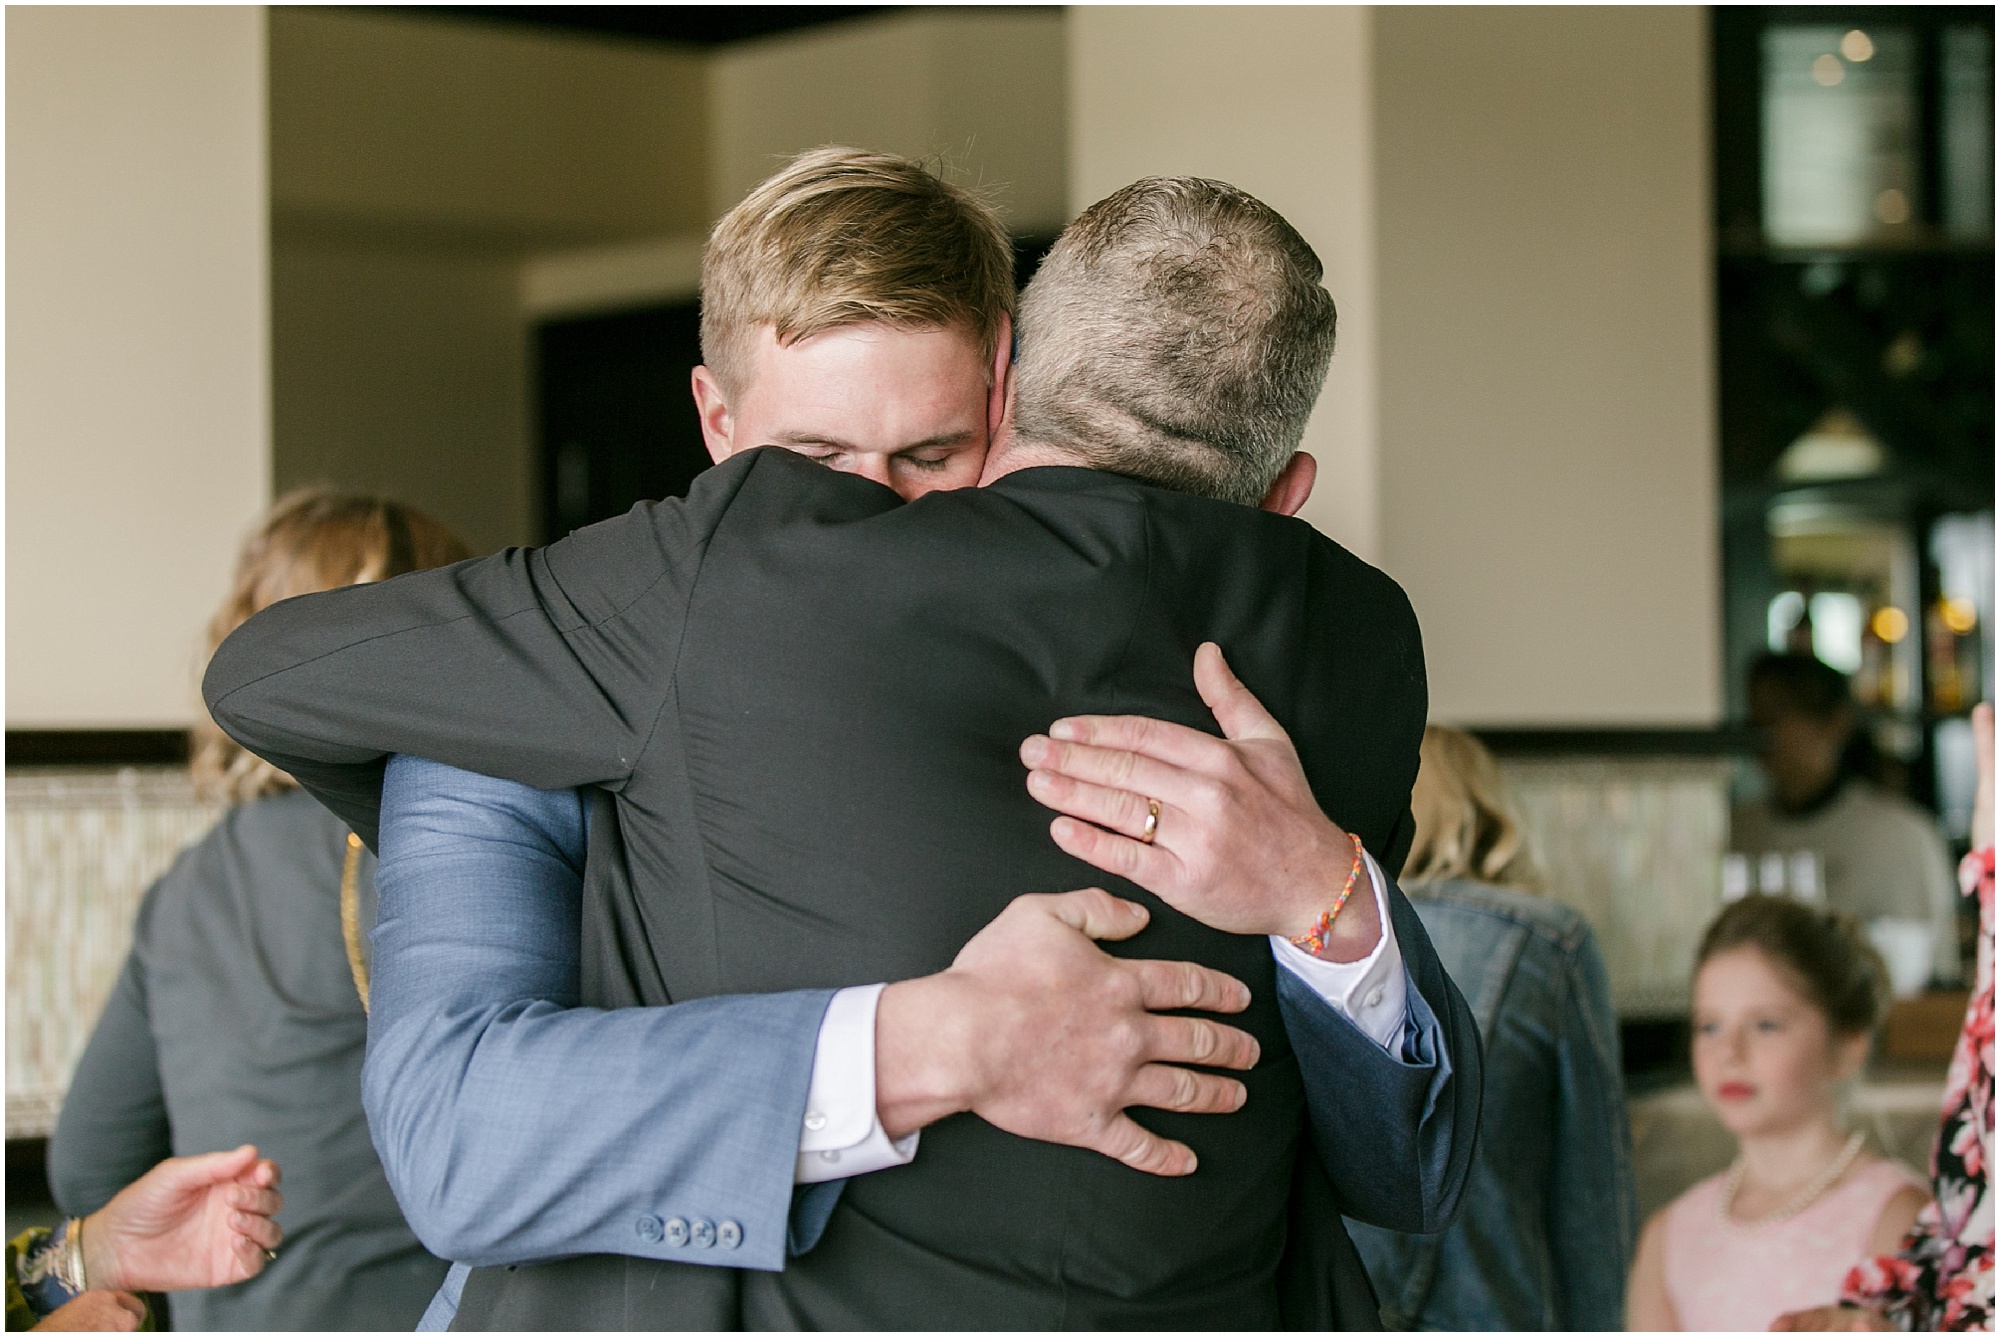 Groom gives his father in law a hug after wedding ceremony.